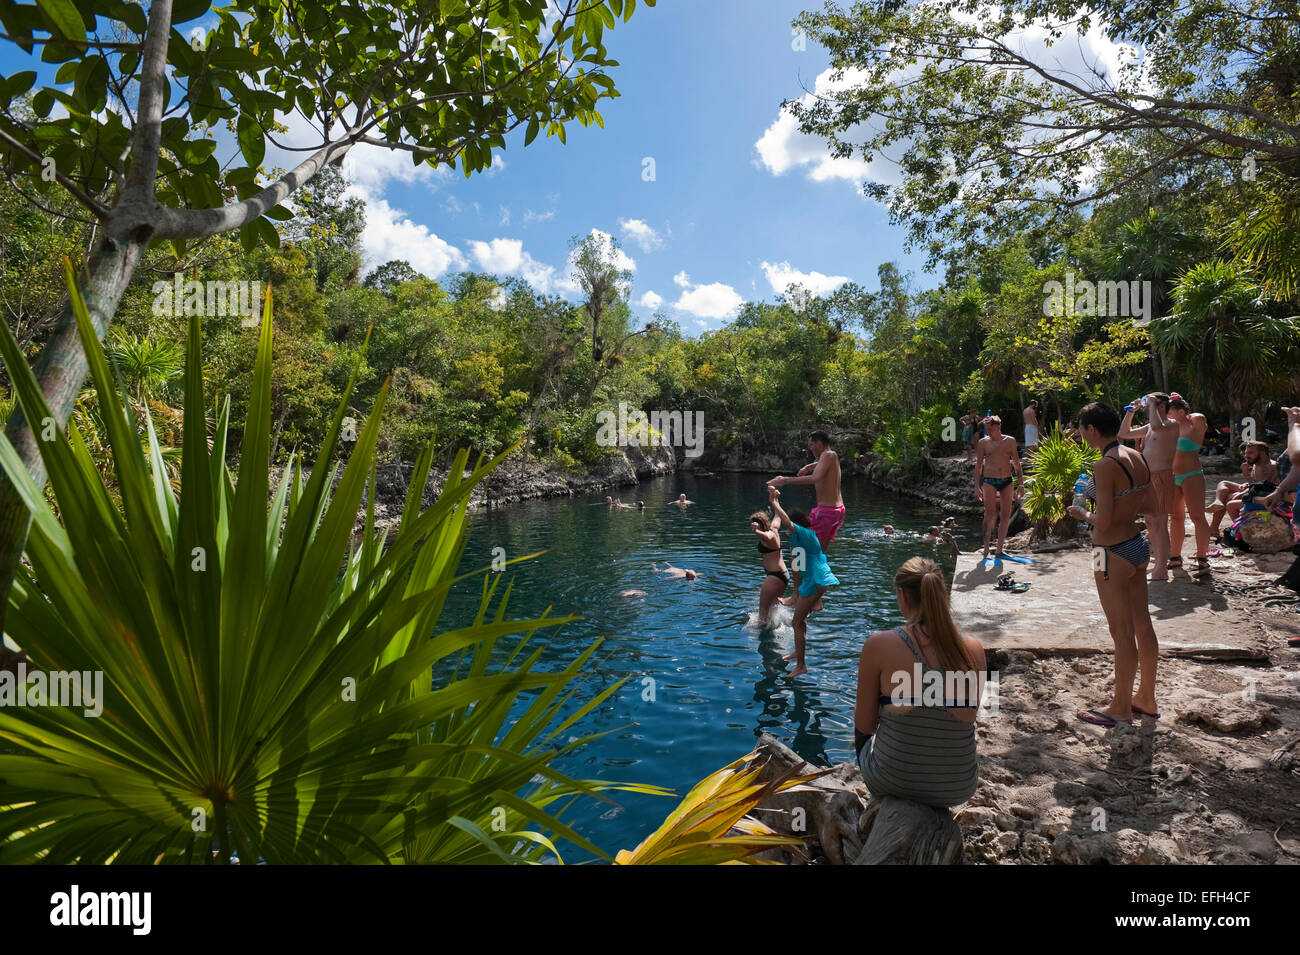 Horizontal view of tourists enjoying the cool water at Cueva de los Peces (Fish Cave) in Cuba. Stock Photo